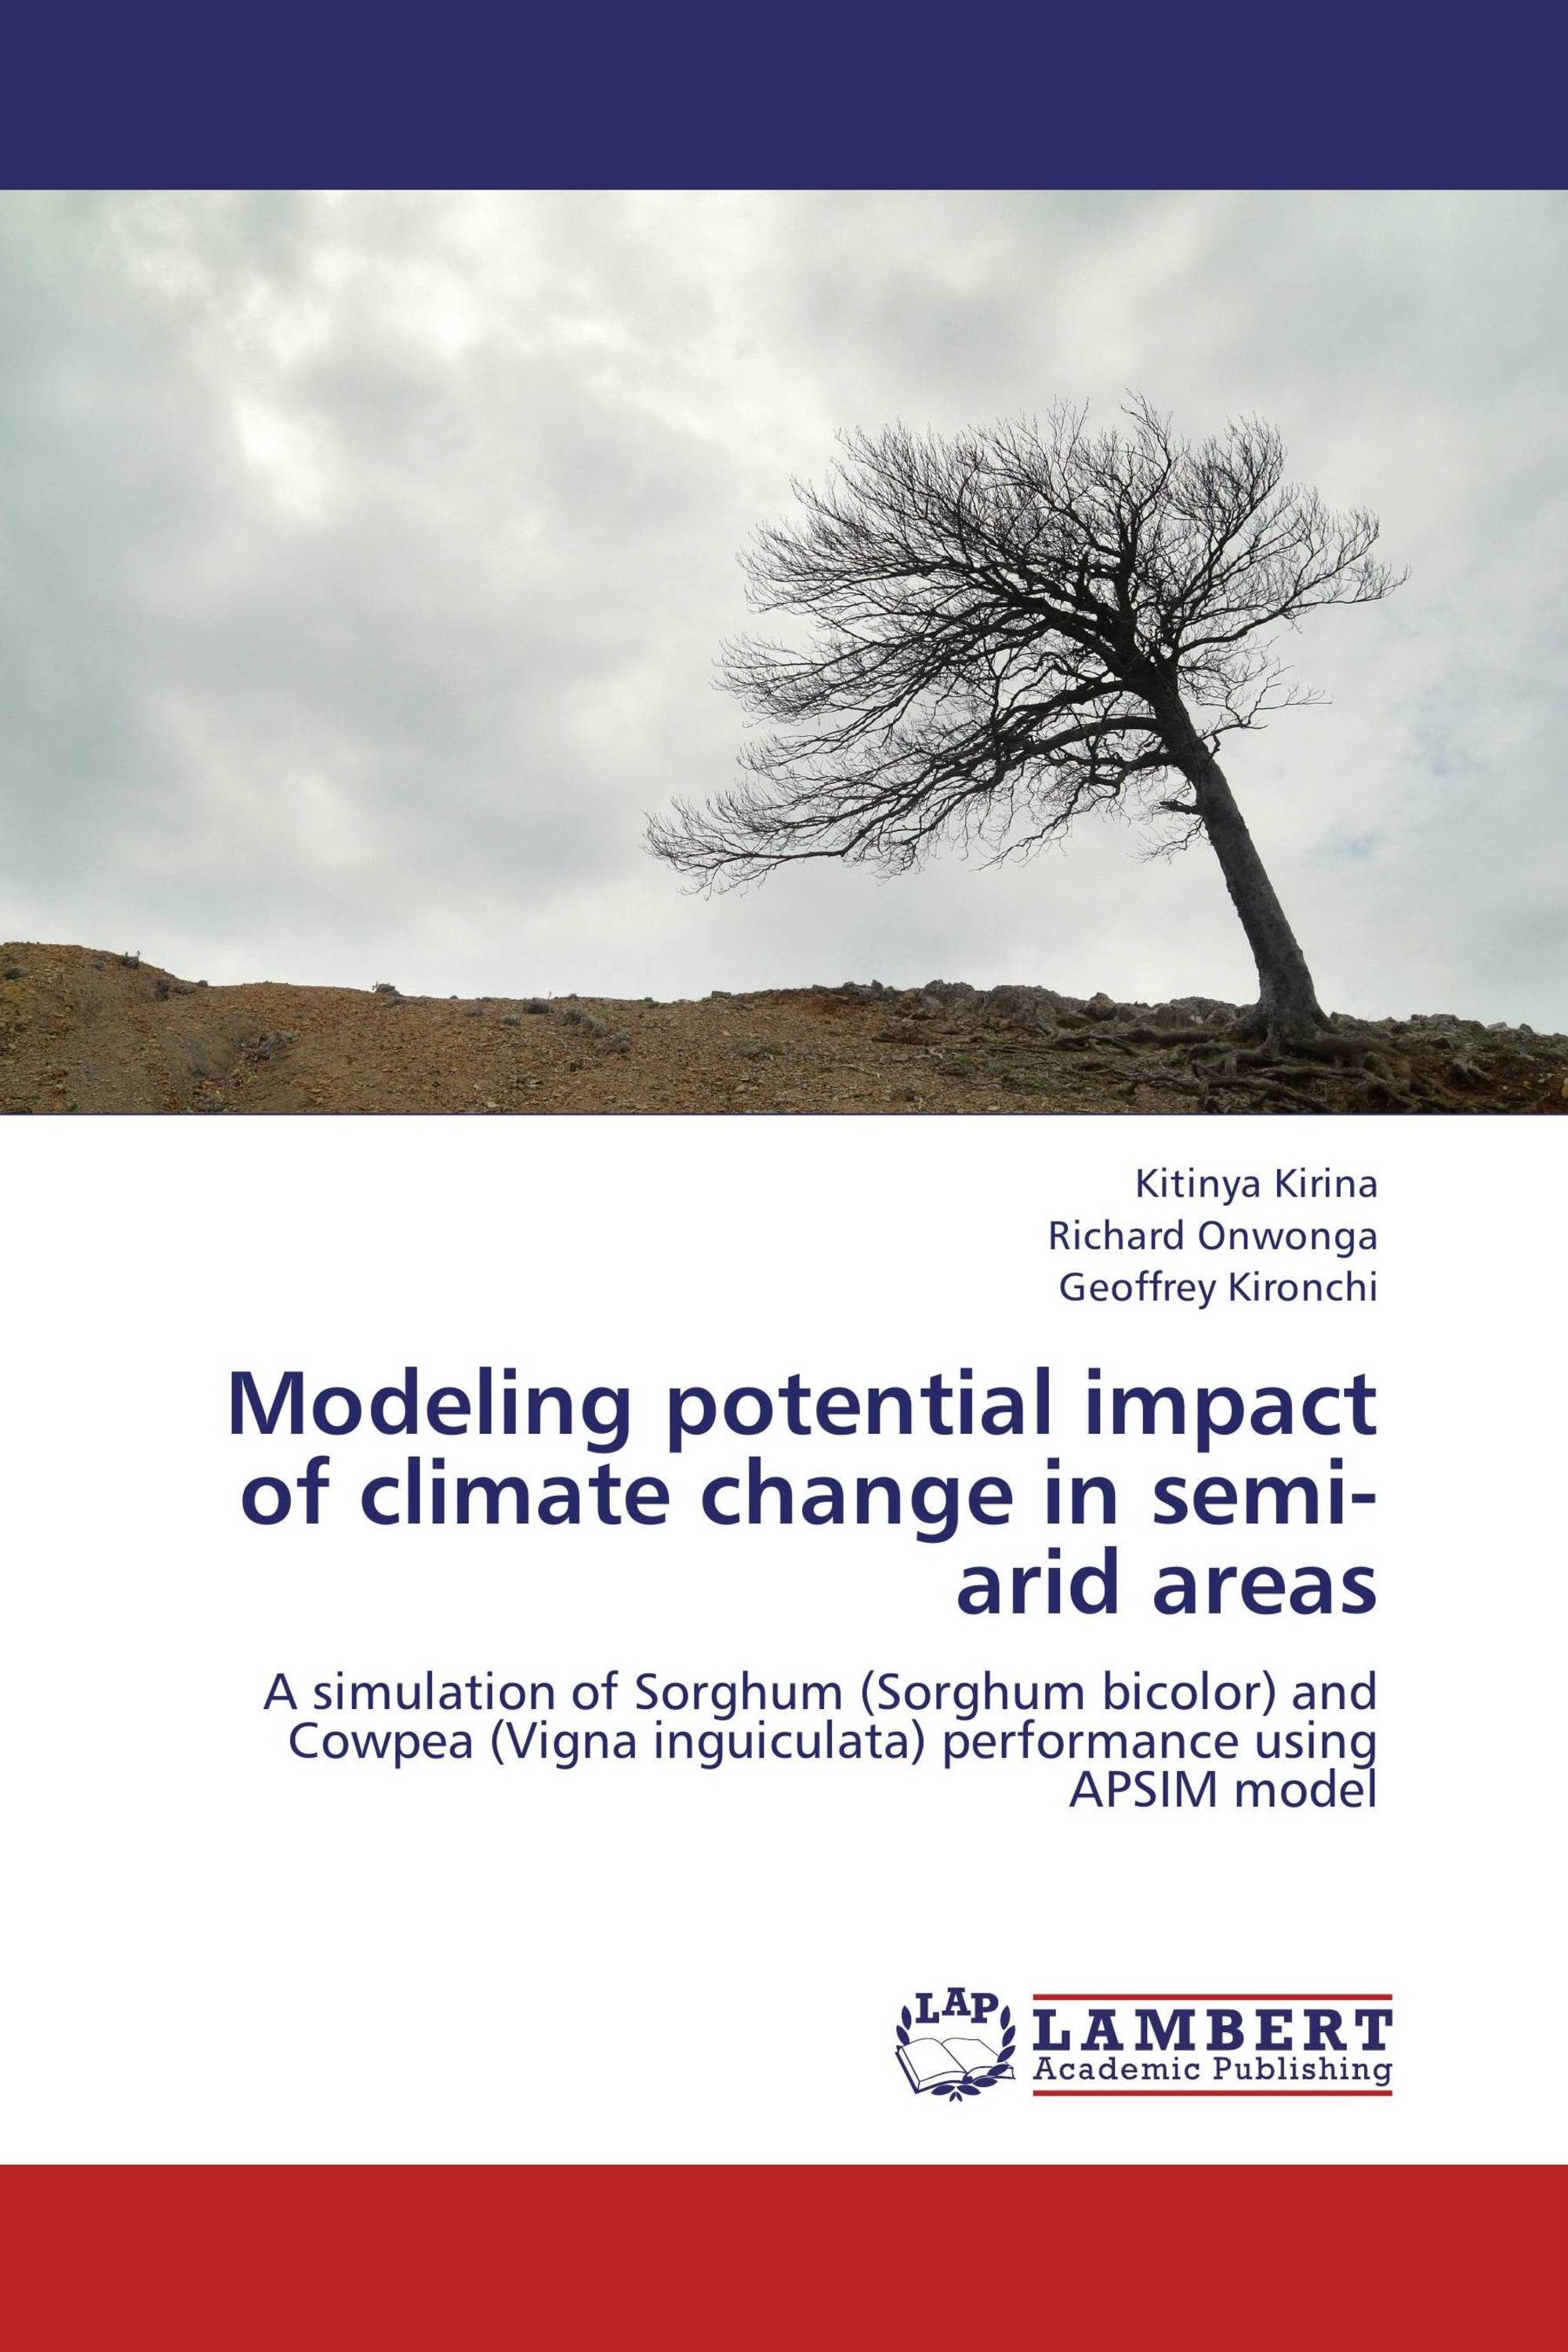 Modeling potential impact of climate change in semi-arid areas